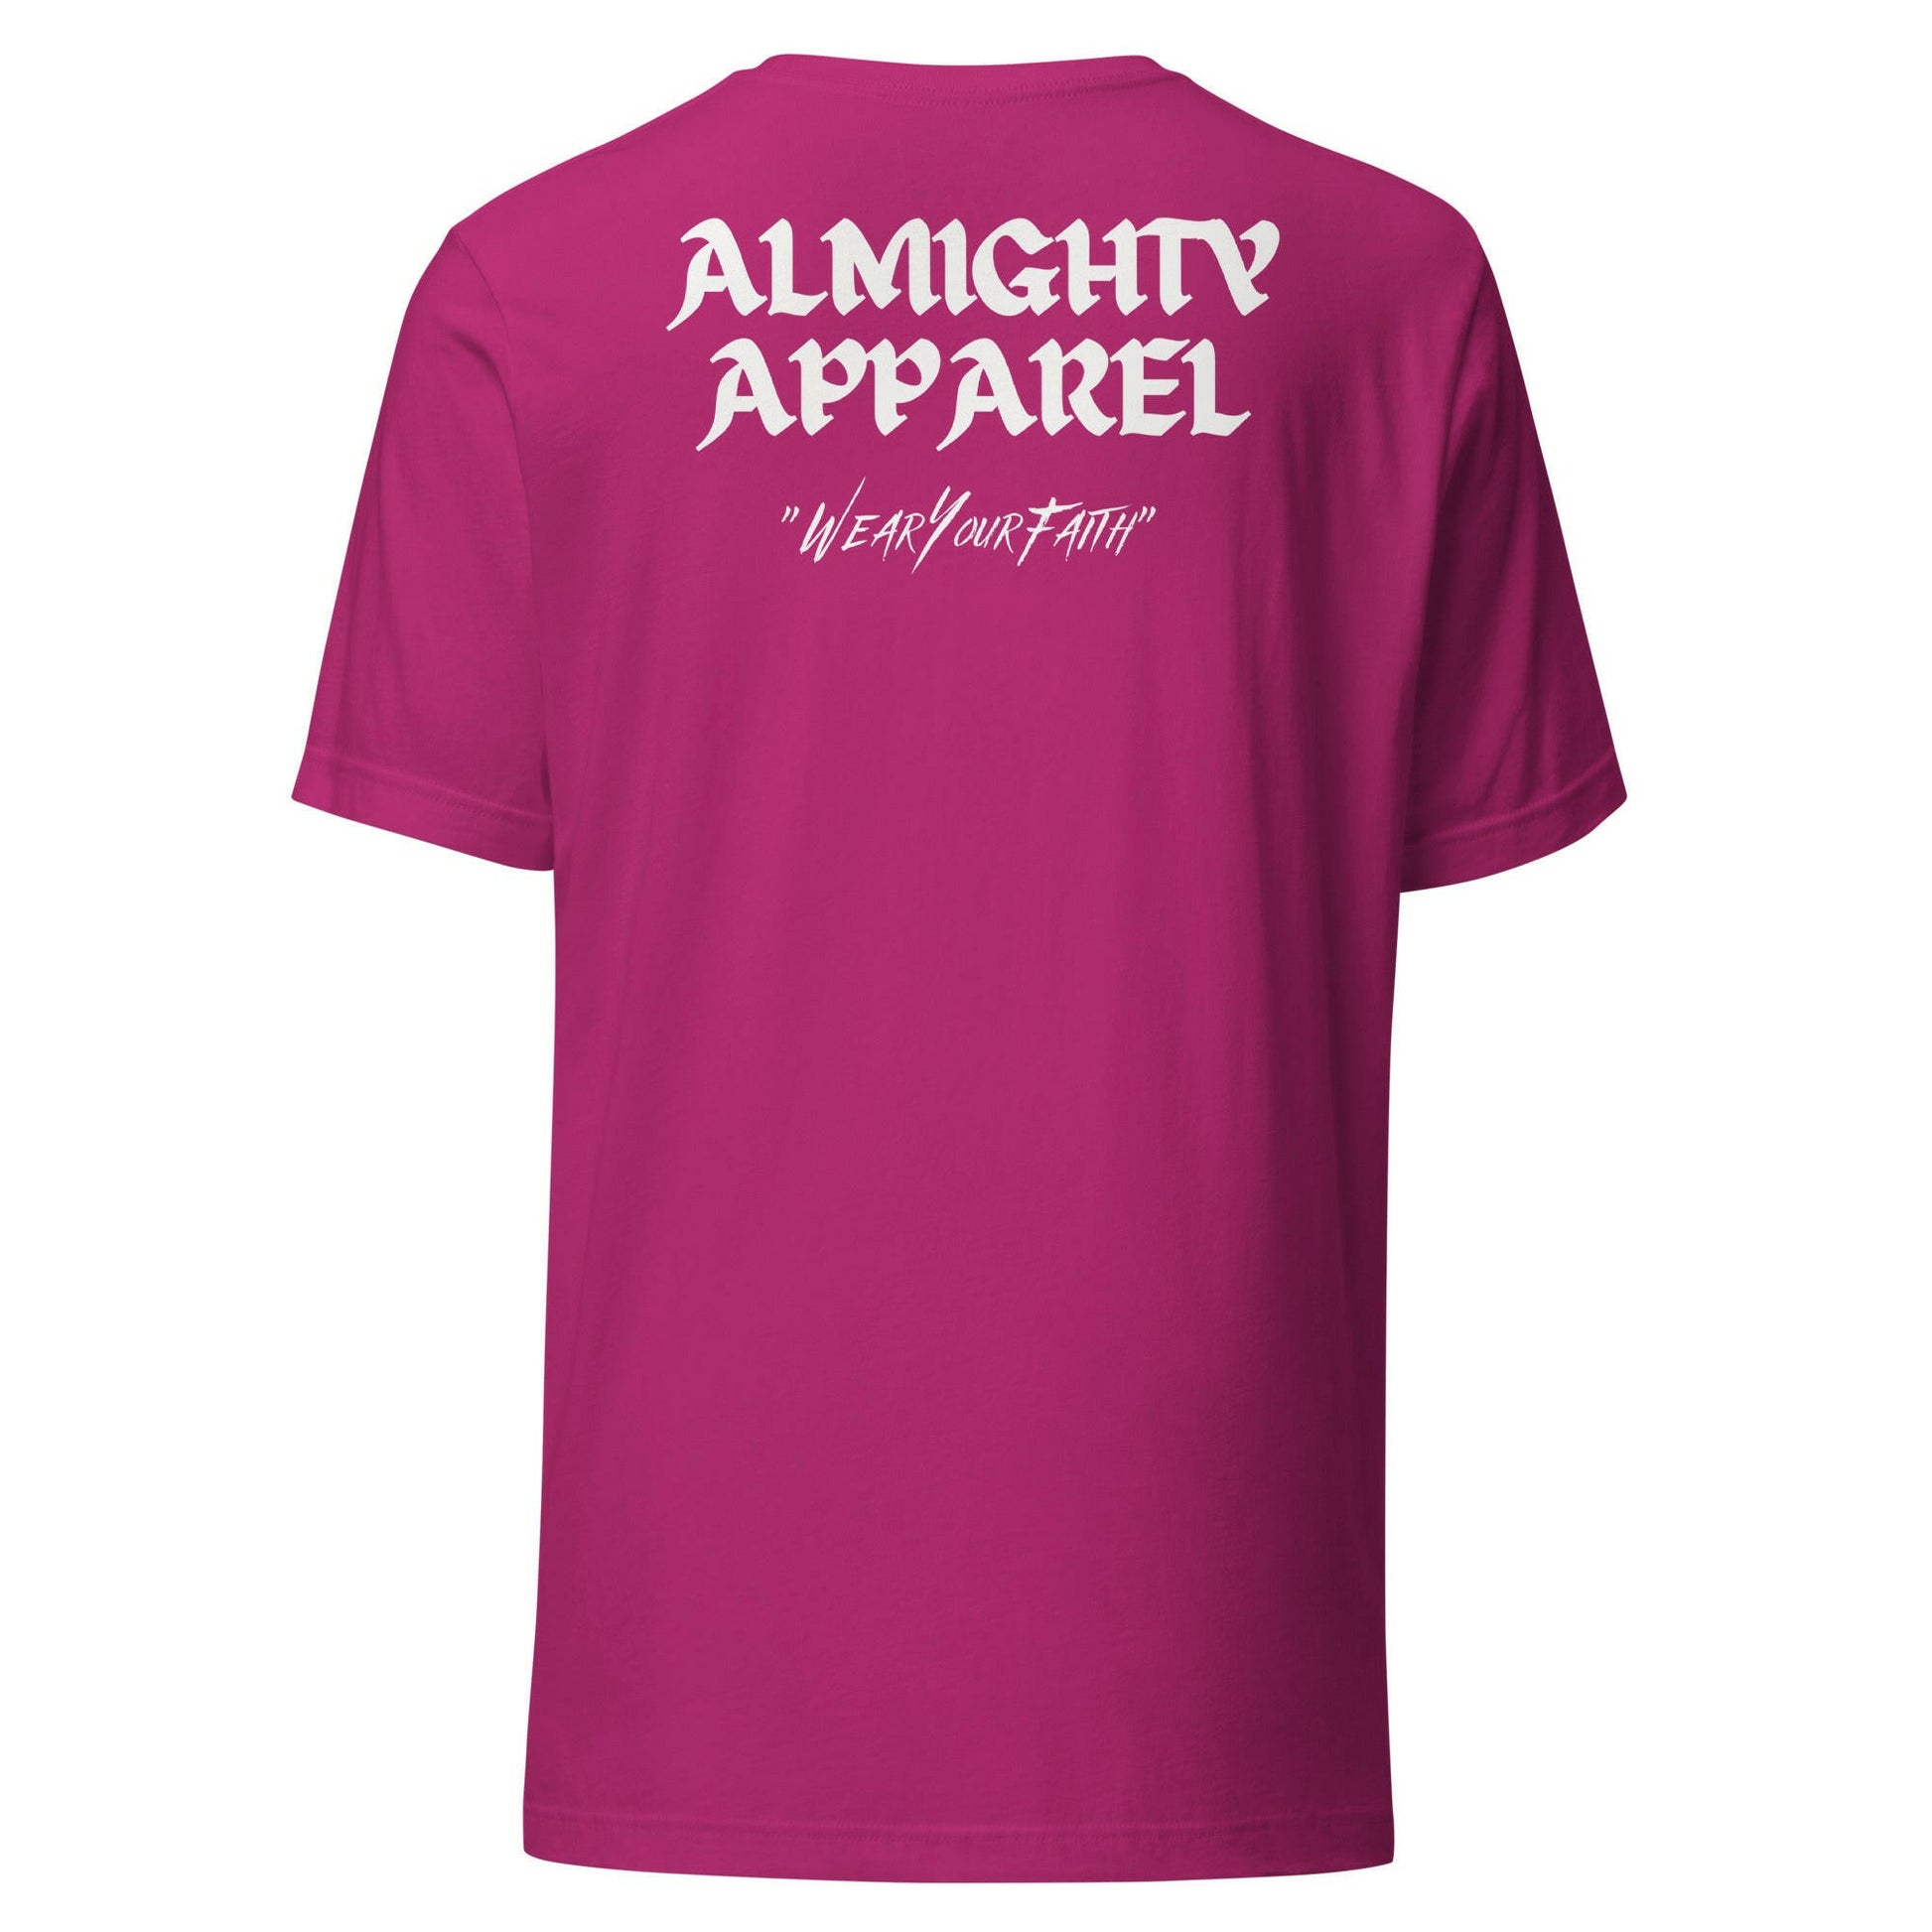 Almighty Apparel - Unisex T-Shirt - Almighty Apparel 